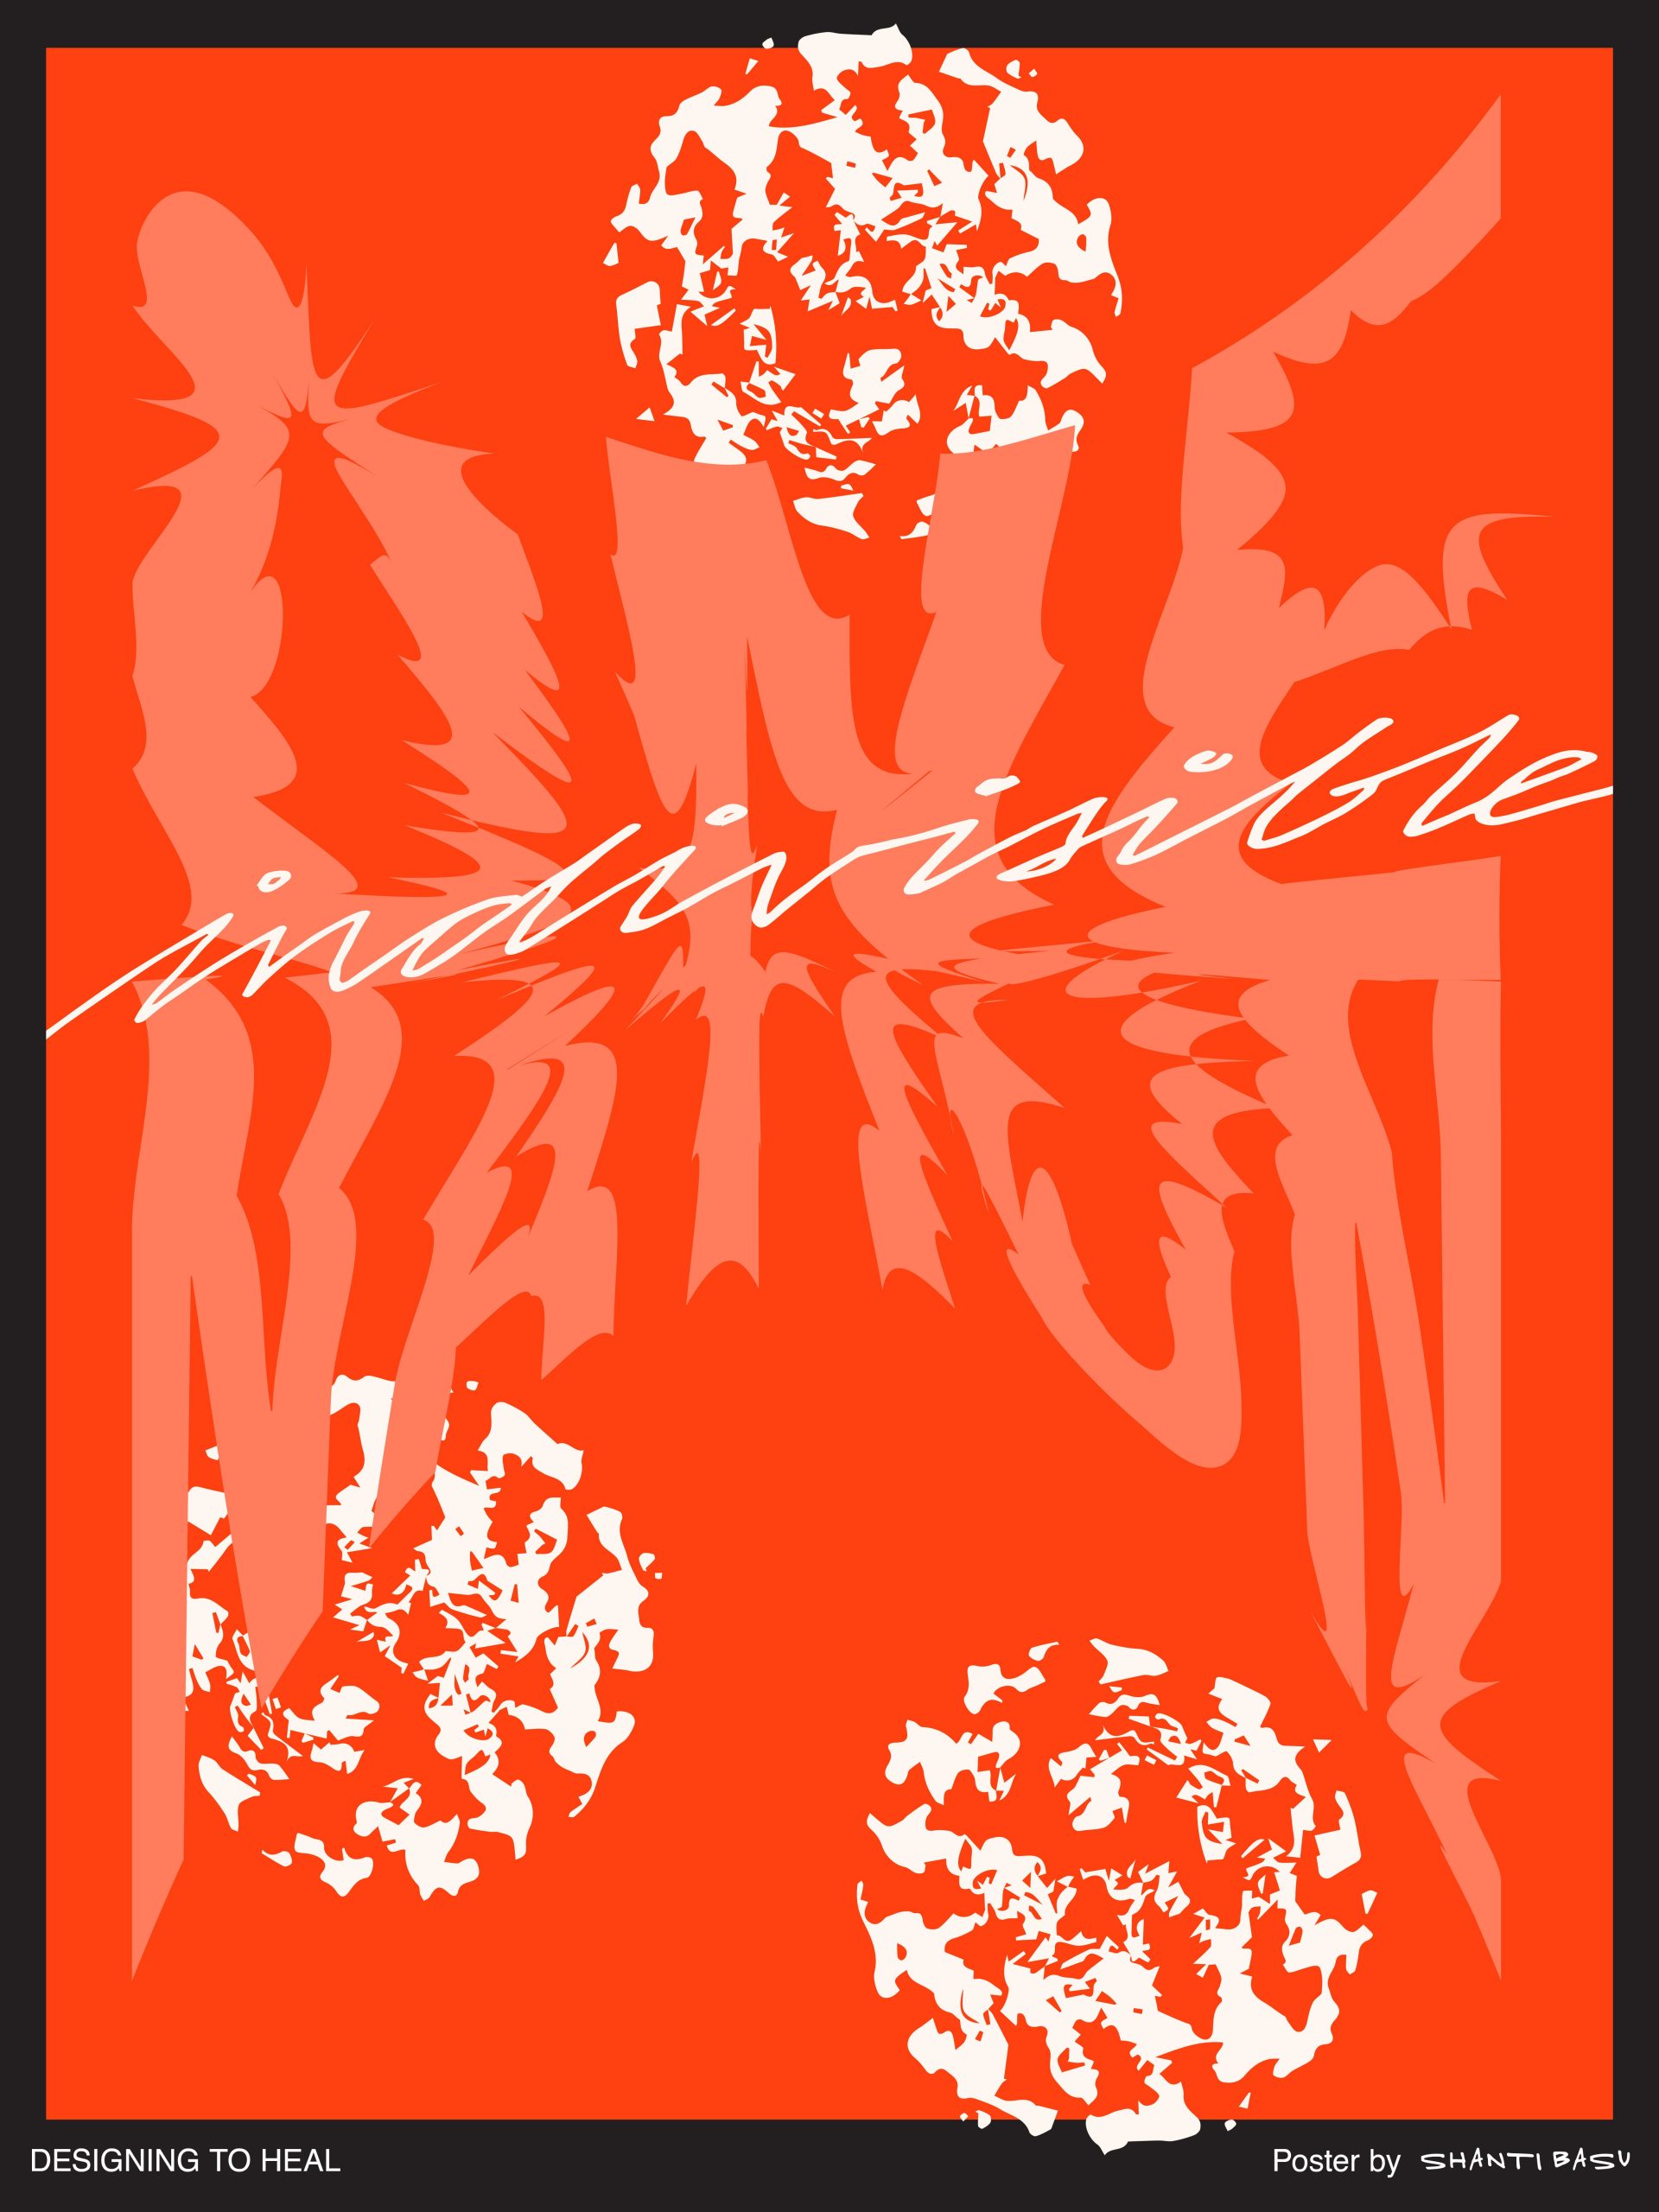 illustrational poster with circular white blotches and the words One Nation Indivisible against a red background